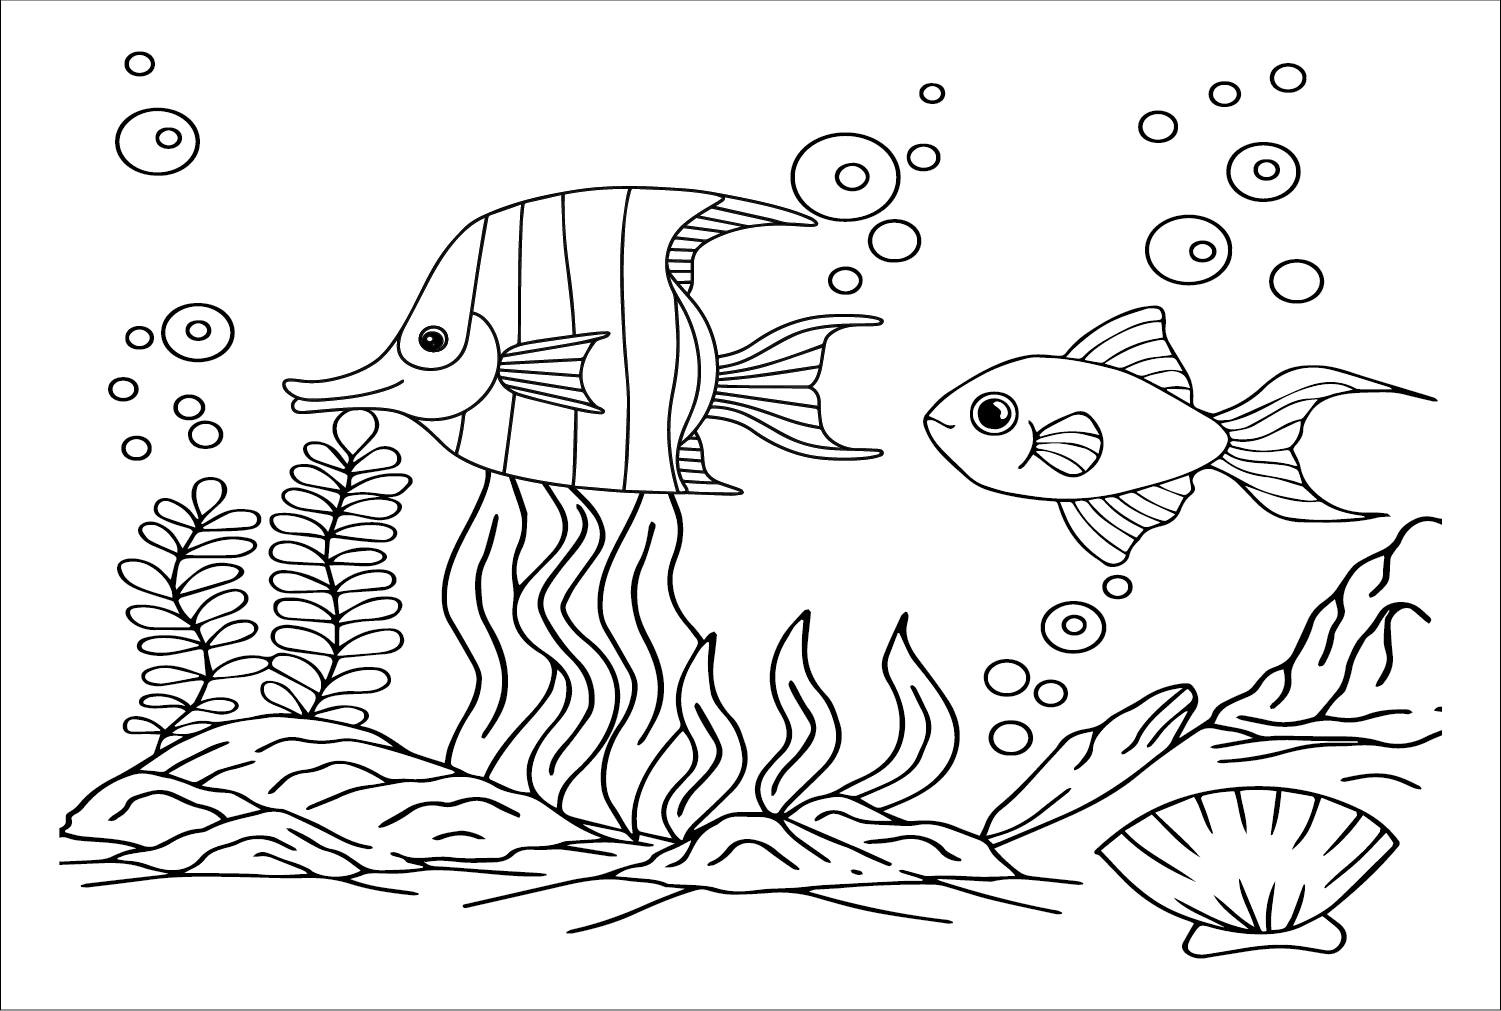 Cute Angelfish Coloring Pages - Angelfish Coloring Pages - Coloring ...